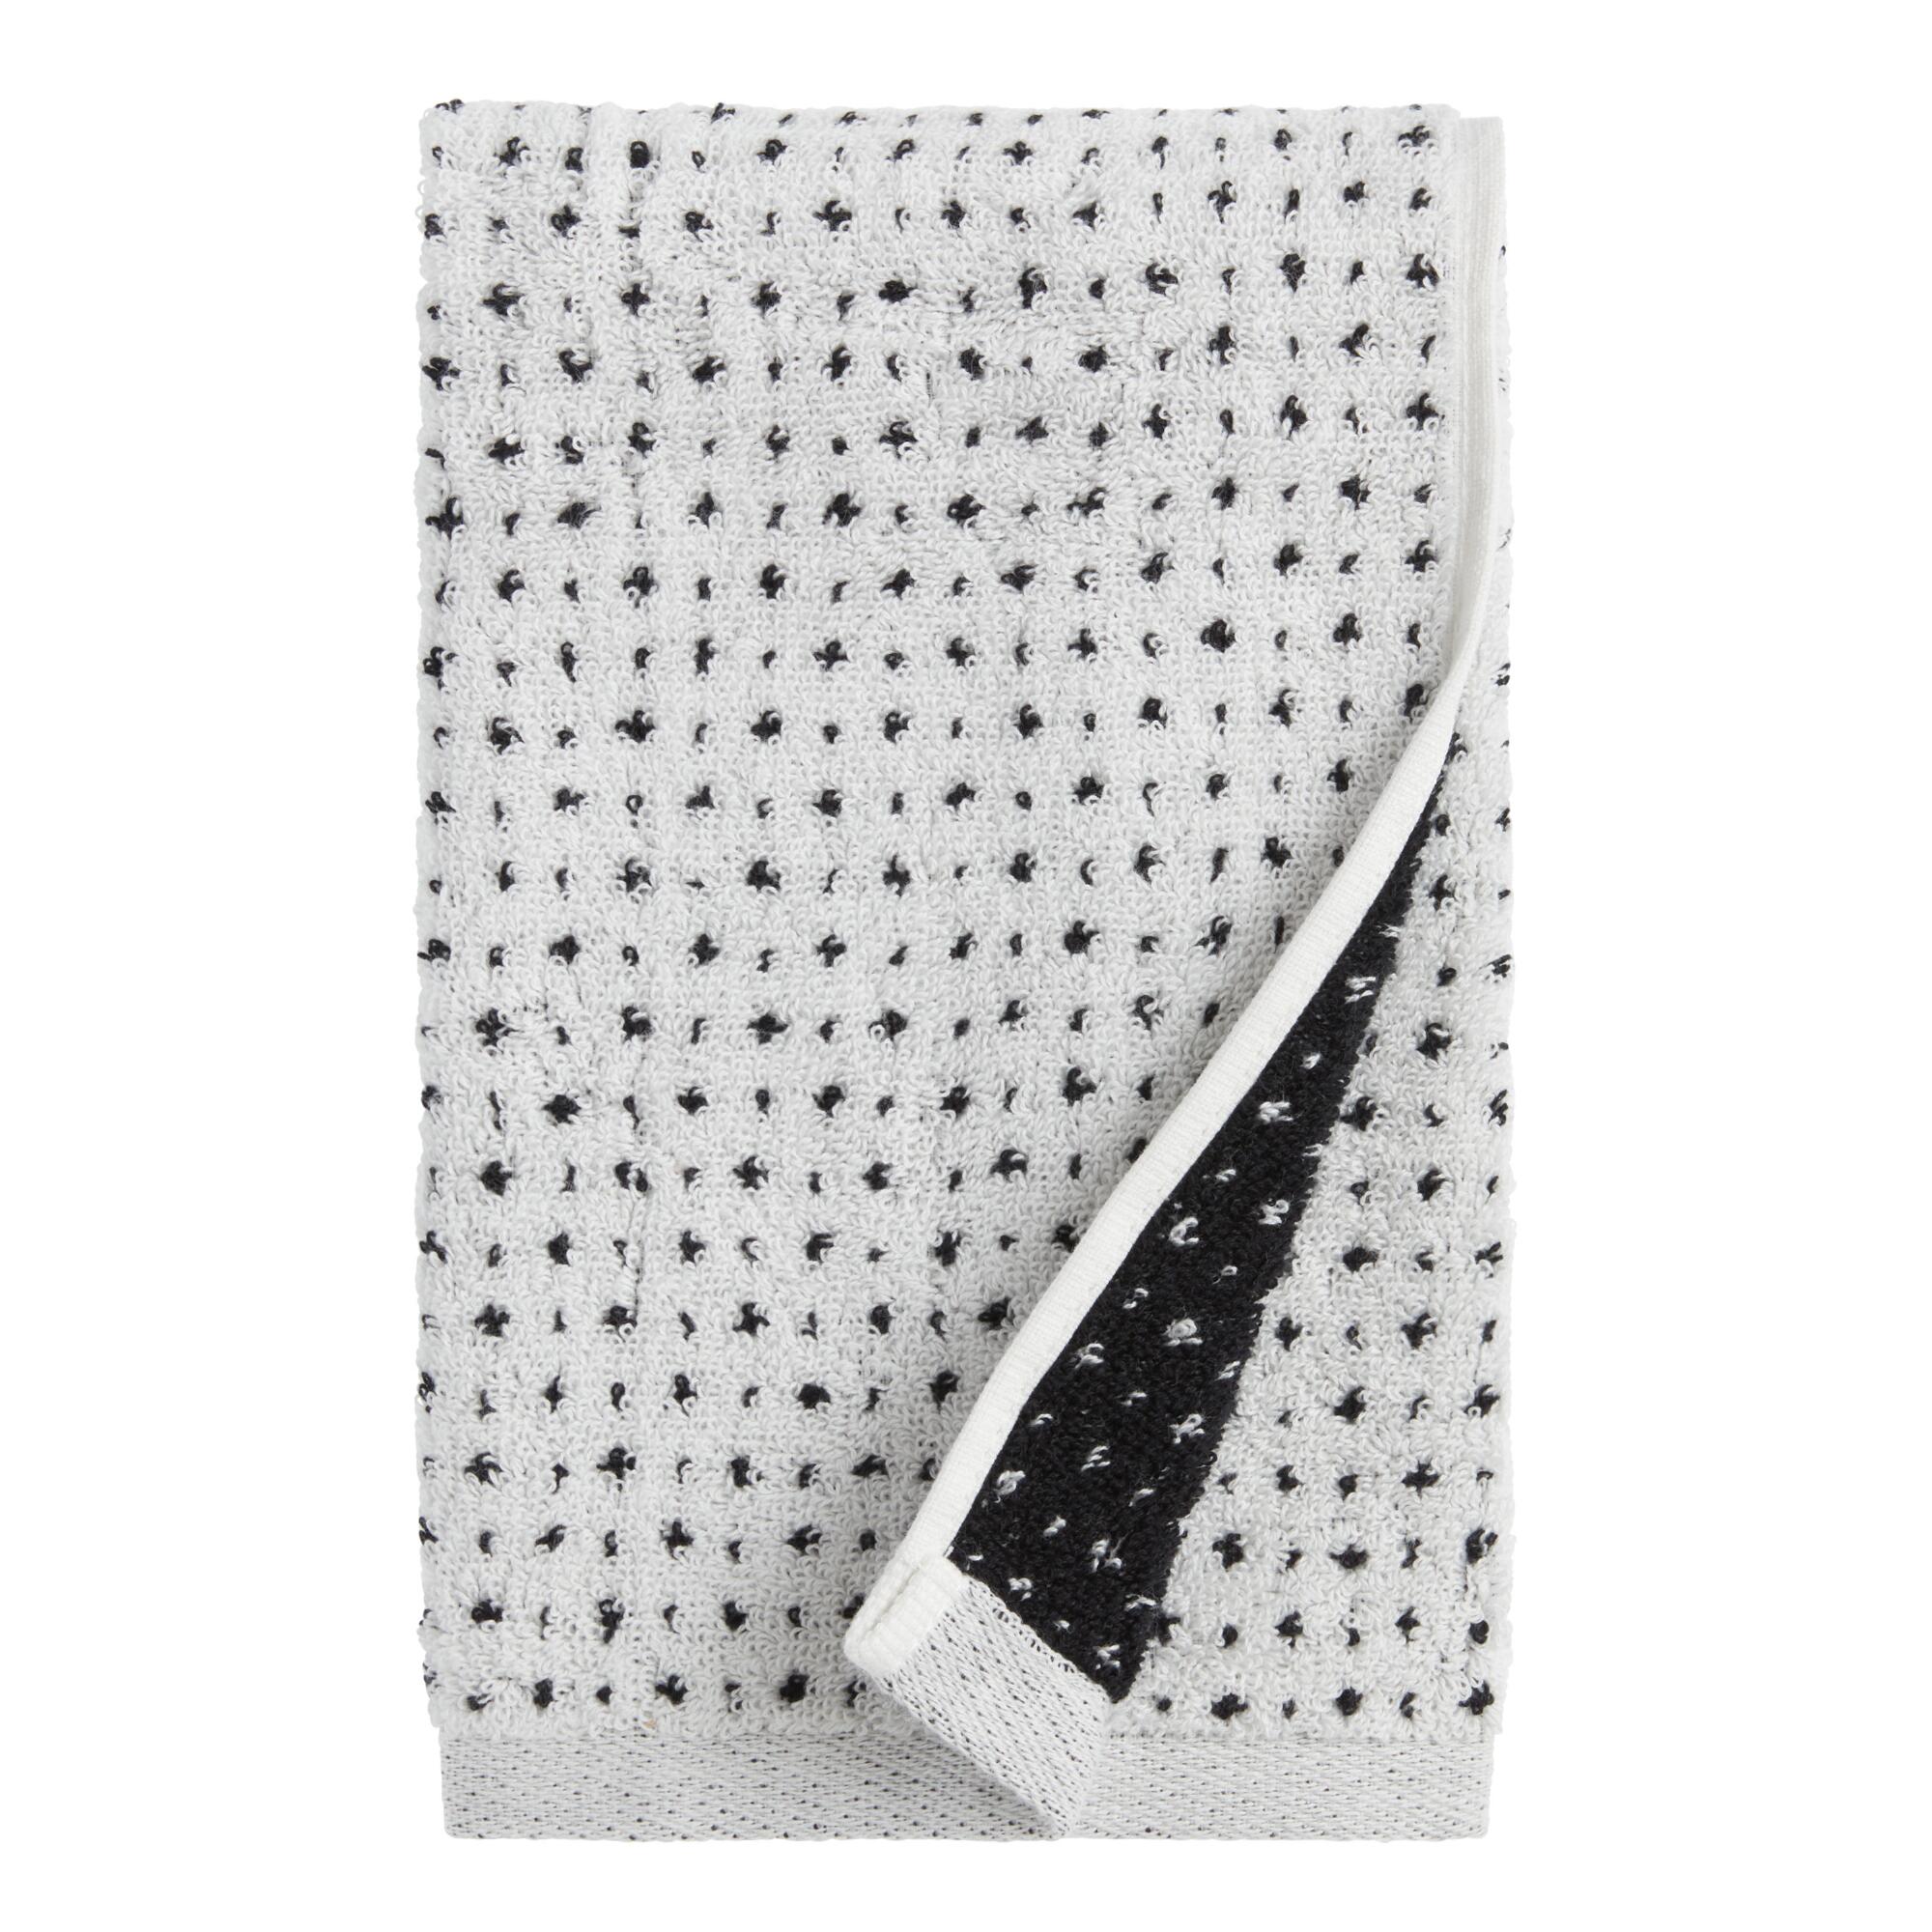 Black and Ivory Woven Dot Nico Hand Towel: Black/White - Cotton by World Market